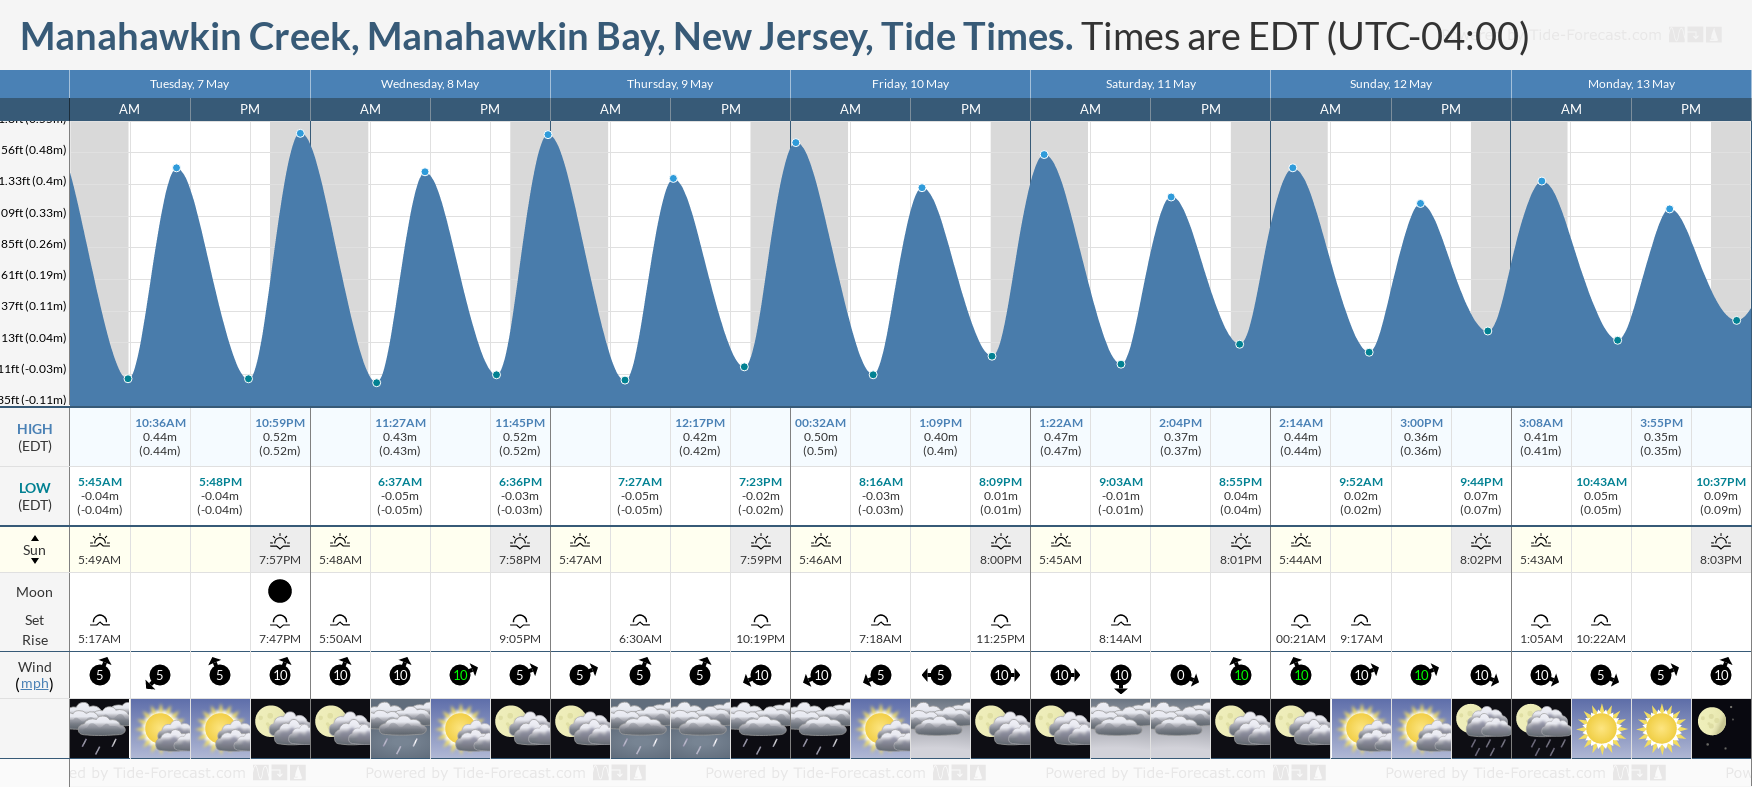 Manahawkin Creek, Manahawkin Bay, New Jersey Tide Chart including high and low tide tide times for the next 7 days